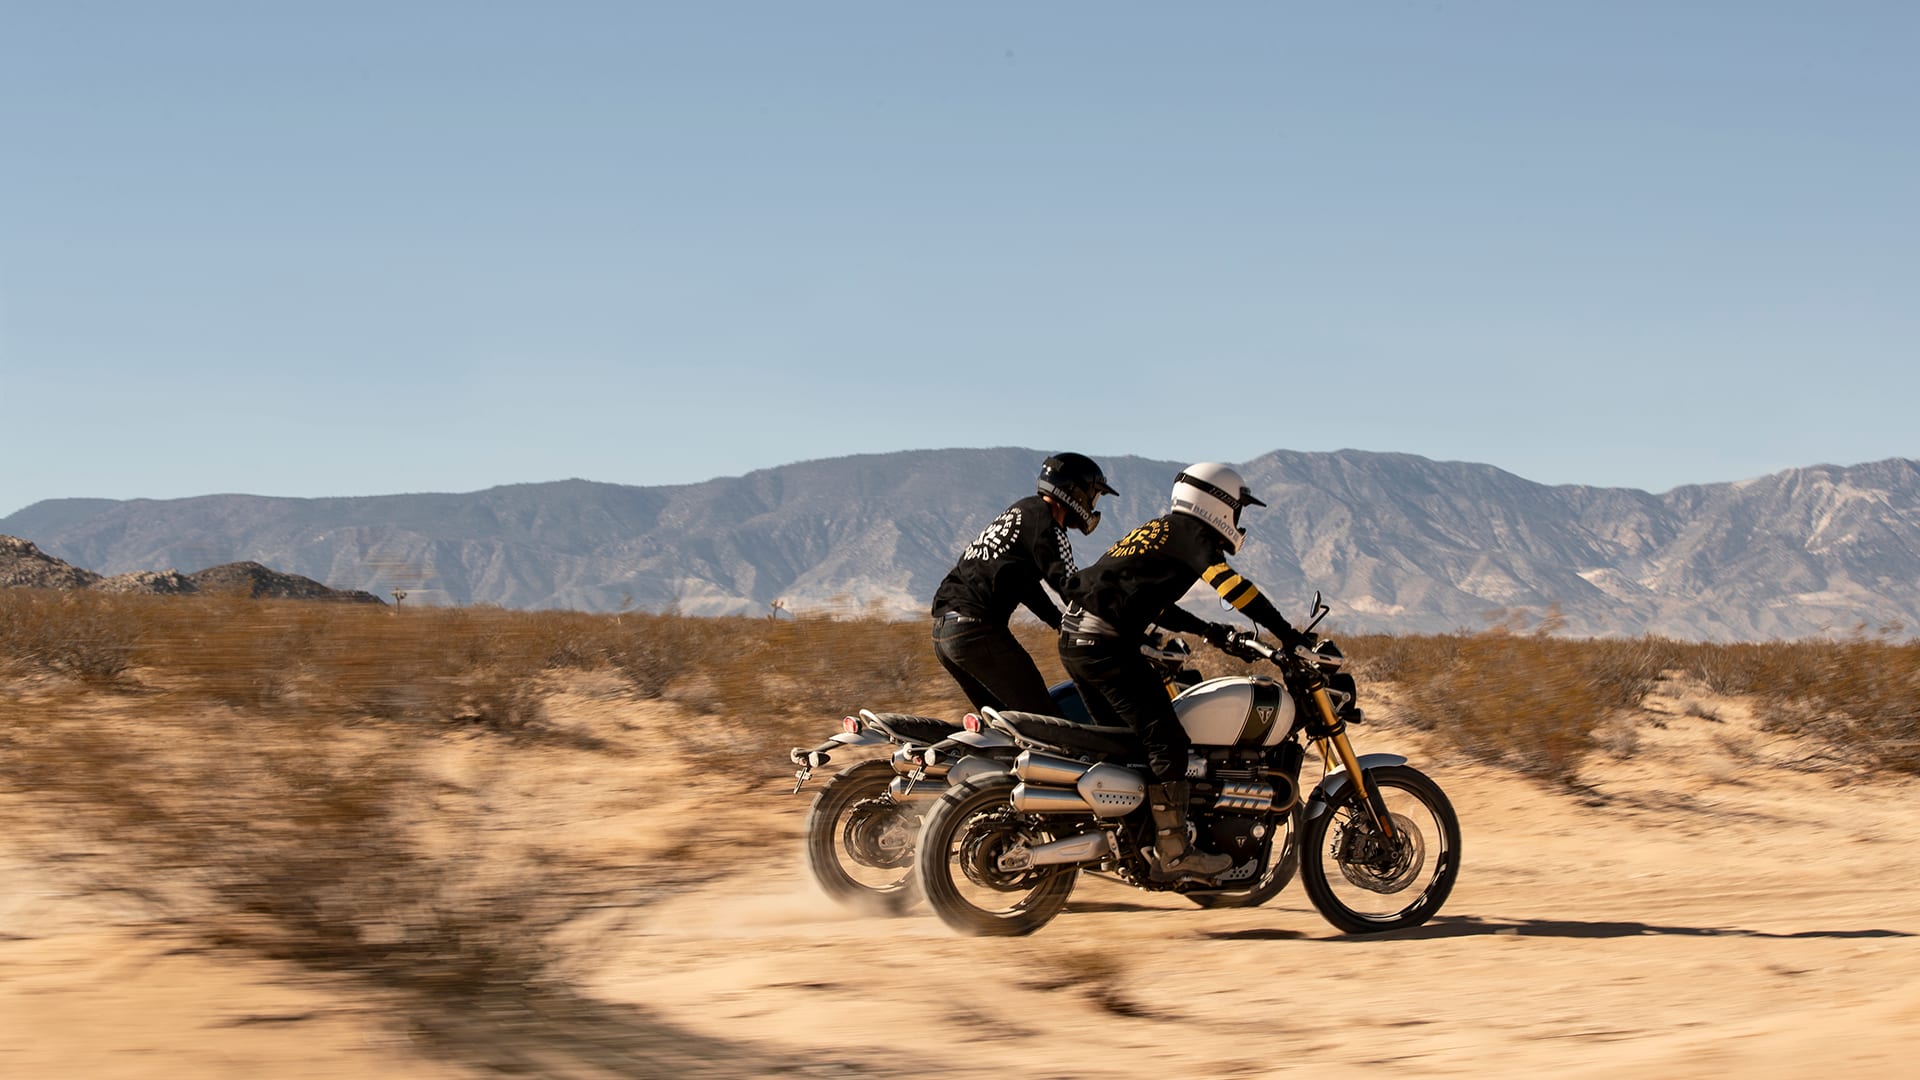 Two Triumph Scrambler 1200s scrambling across the dessert in extreme off-road style